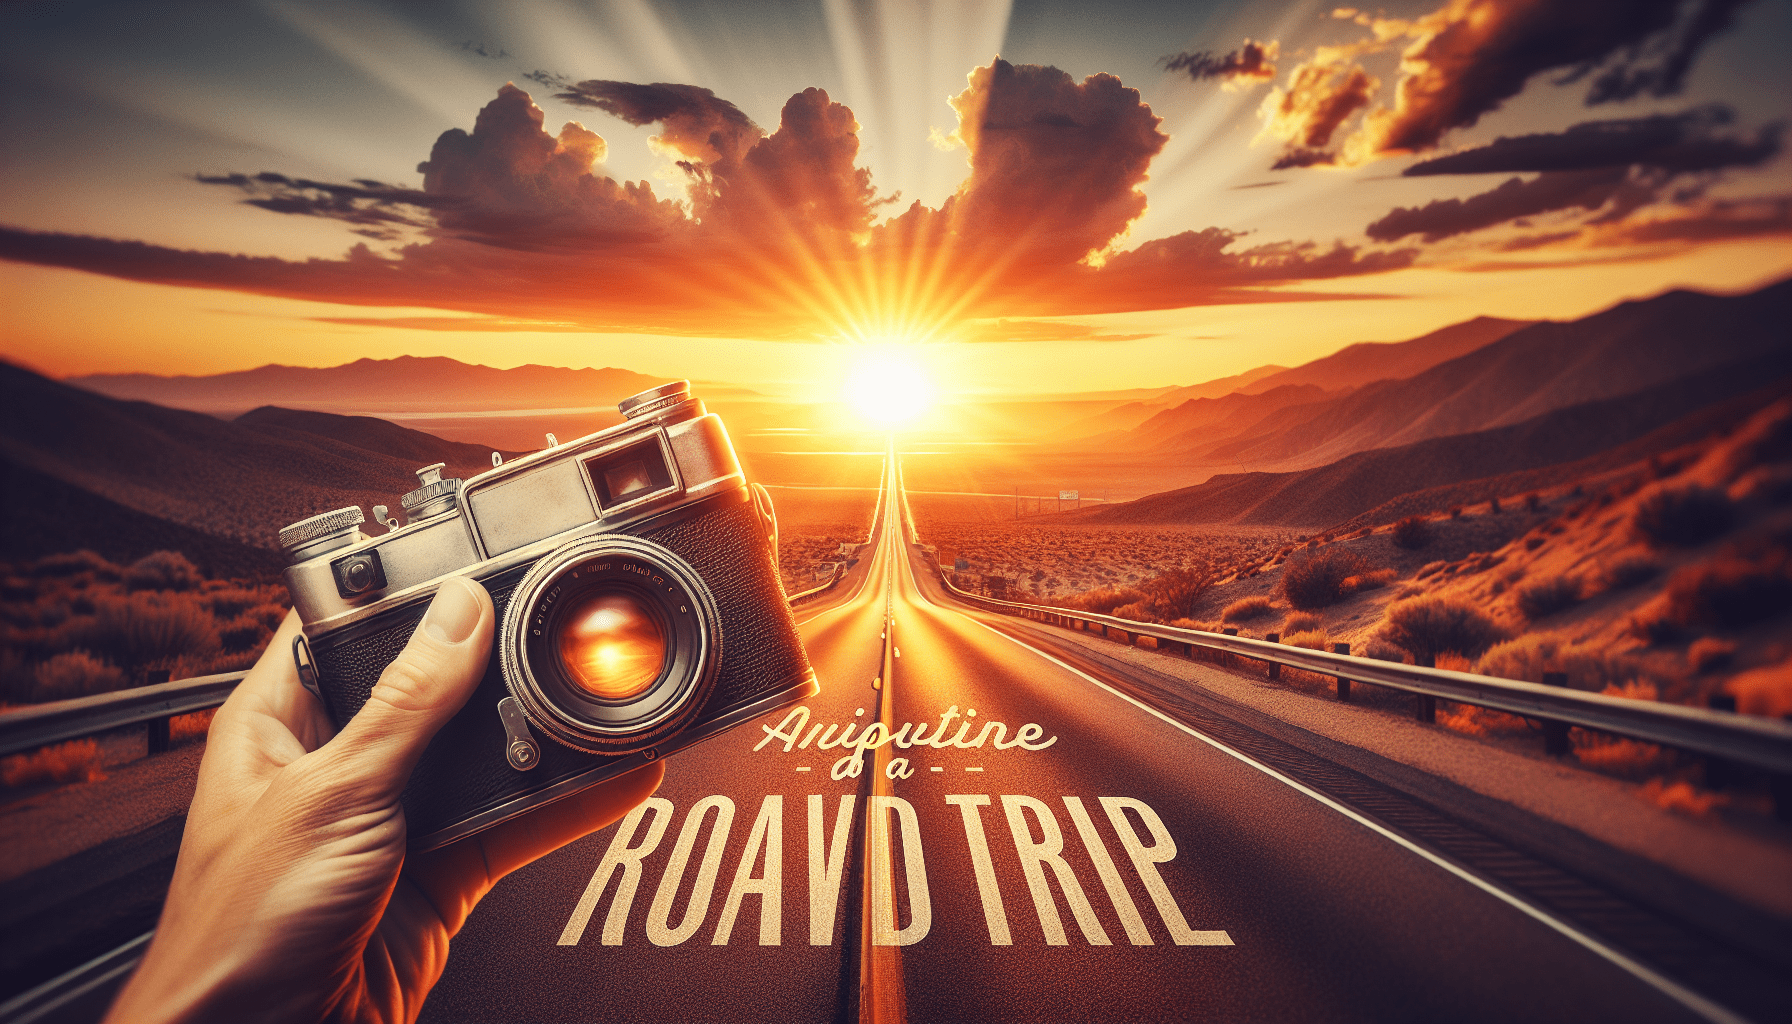 How Do You Use Road Trip In A Sentence?